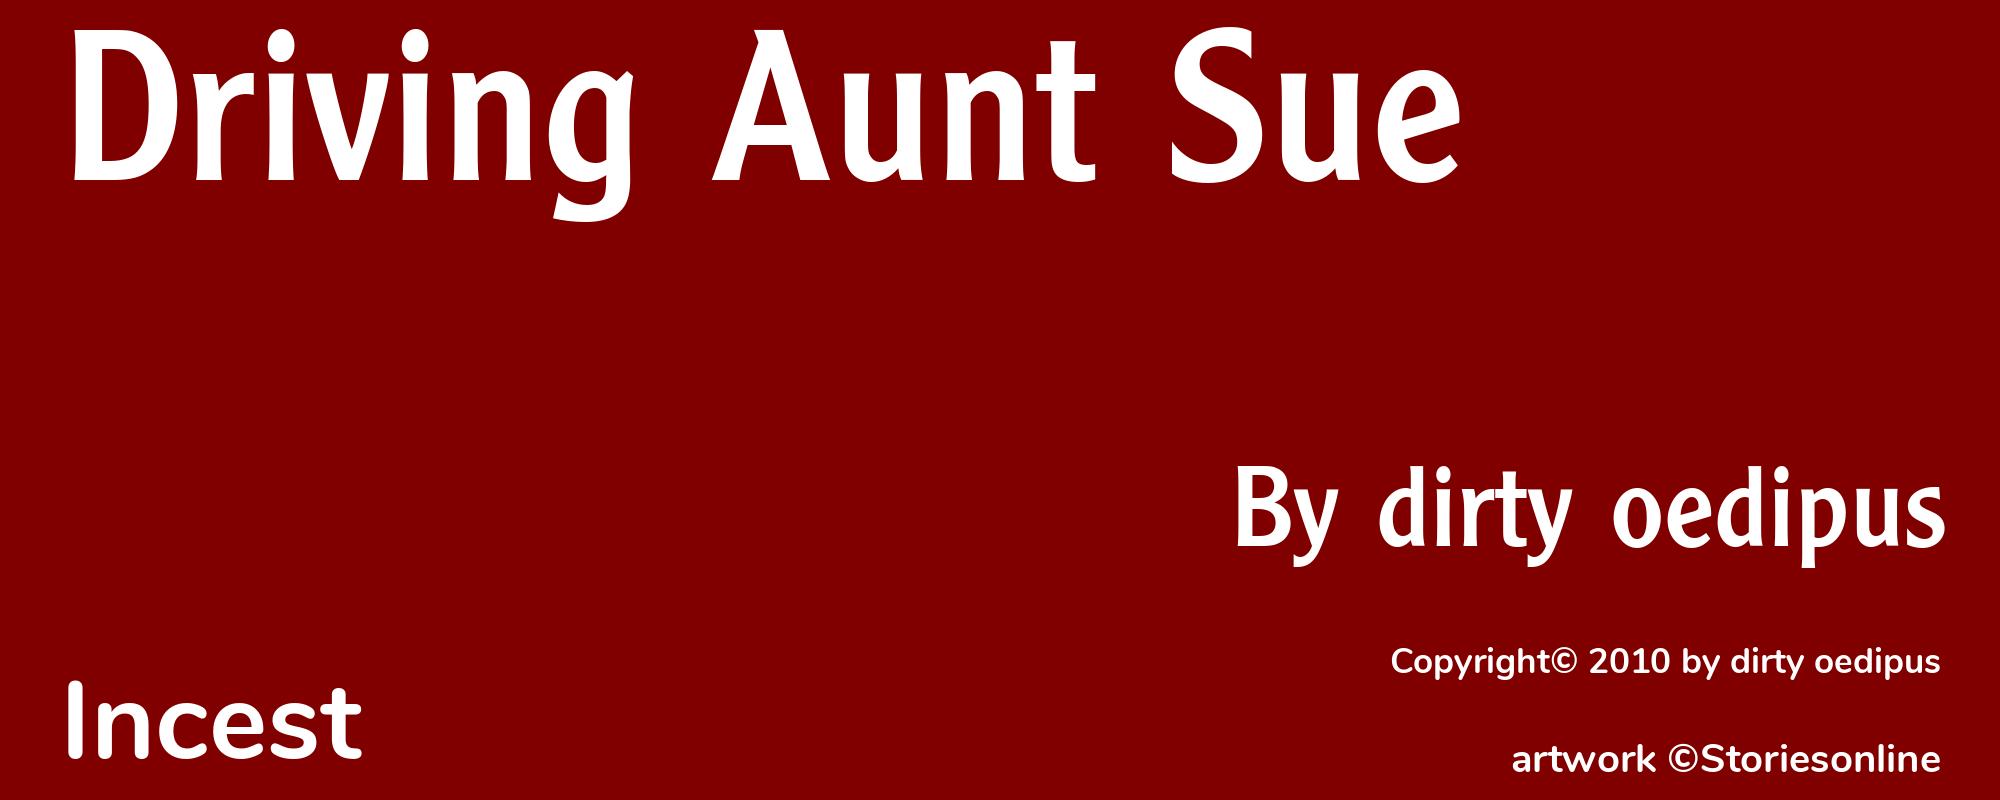 Driving Aunt Sue - Cover